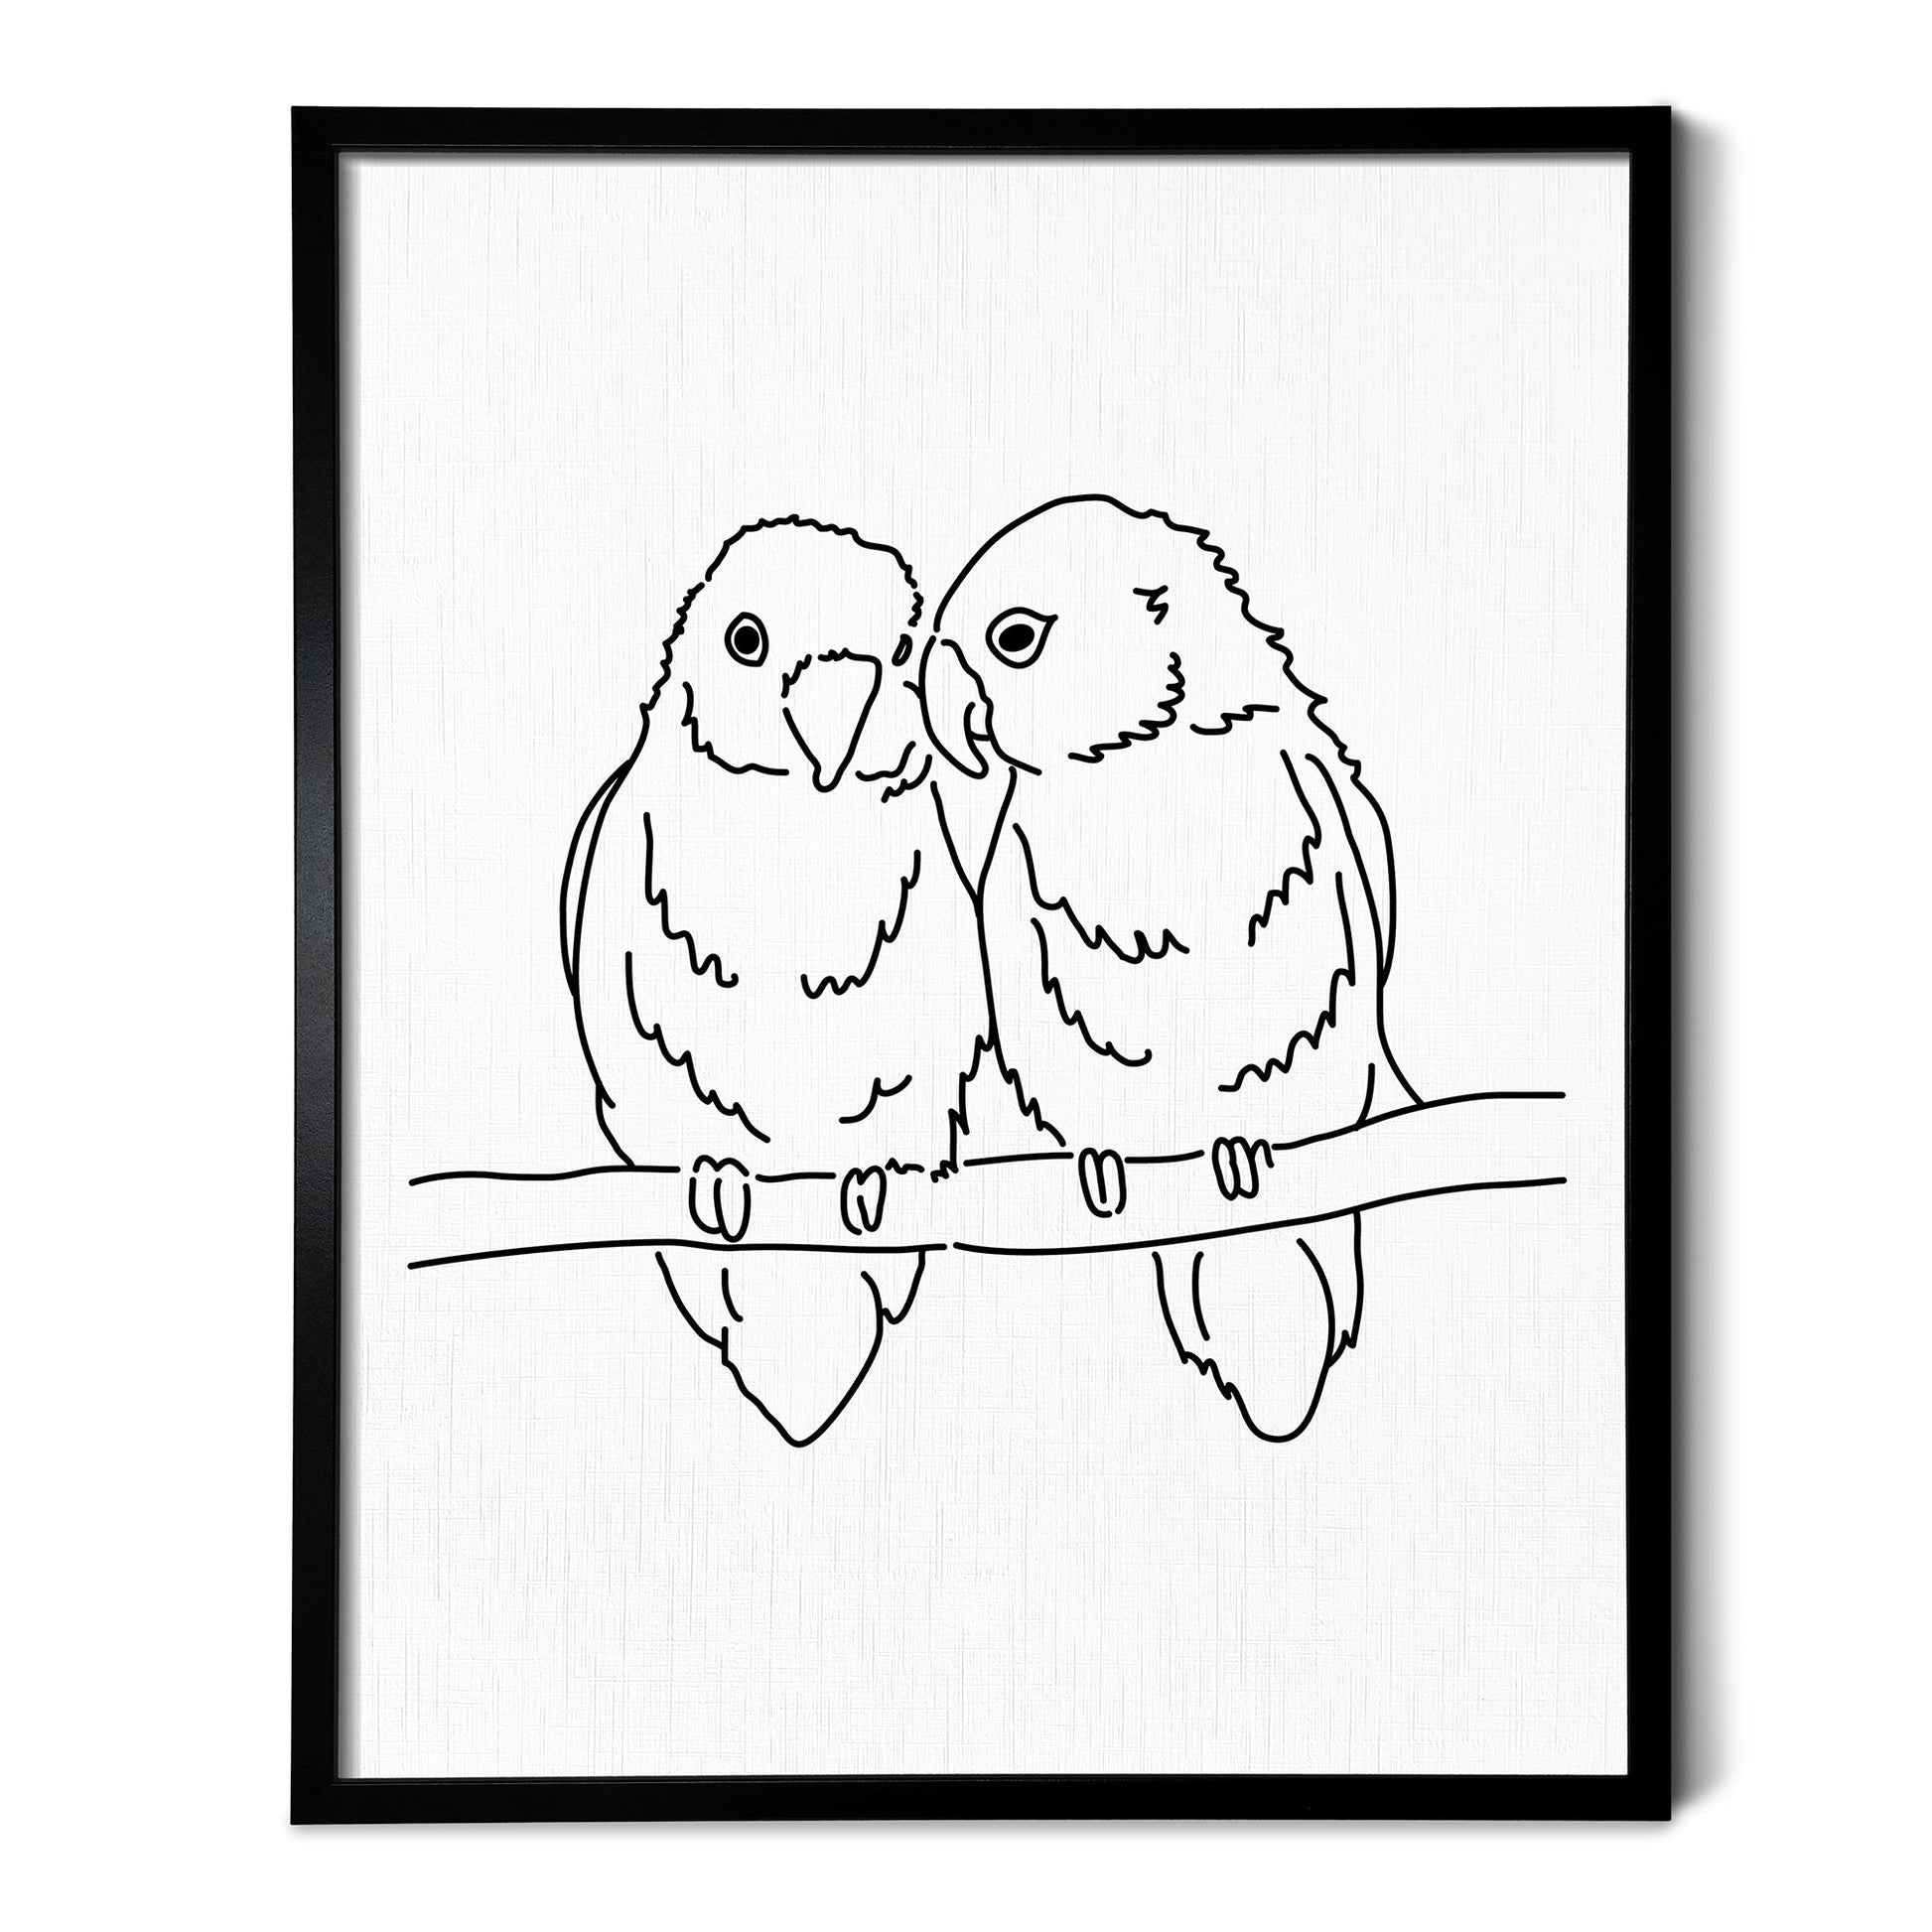 A line art drawing of a Love Birds on white linen paper in a thin black picture frame